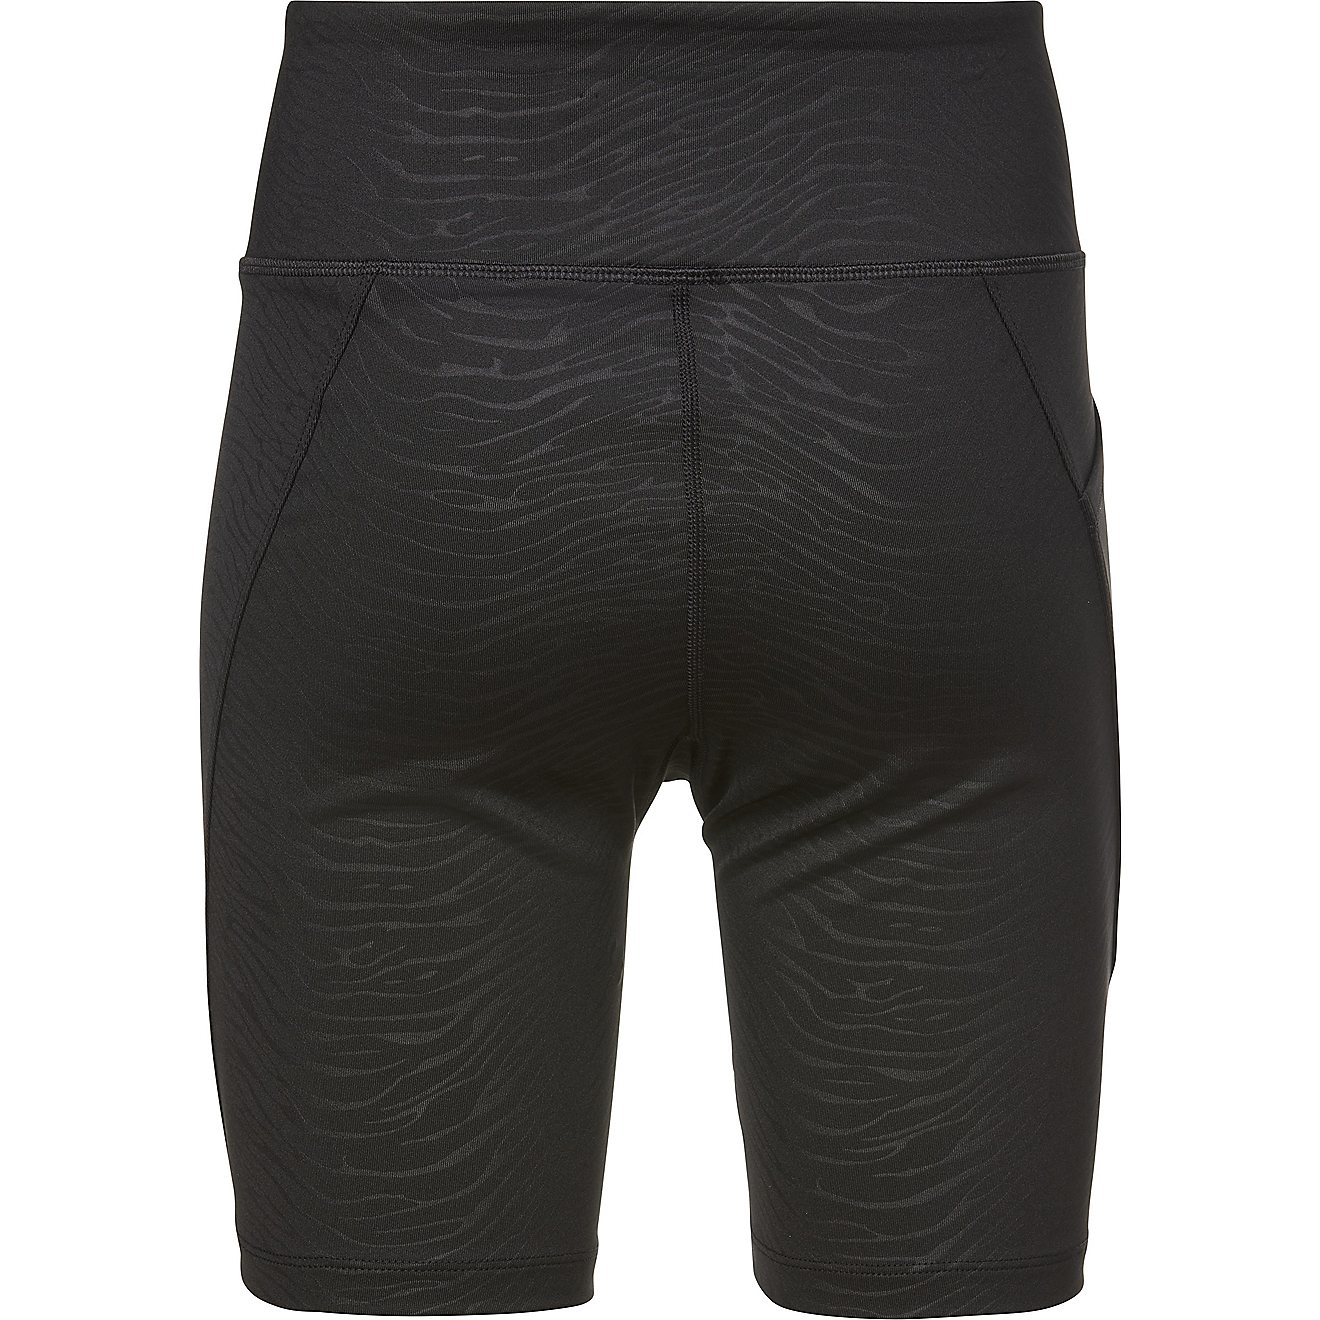 BCG Women's Embossed Bike Shorts 7in                                                                                             - view number 2